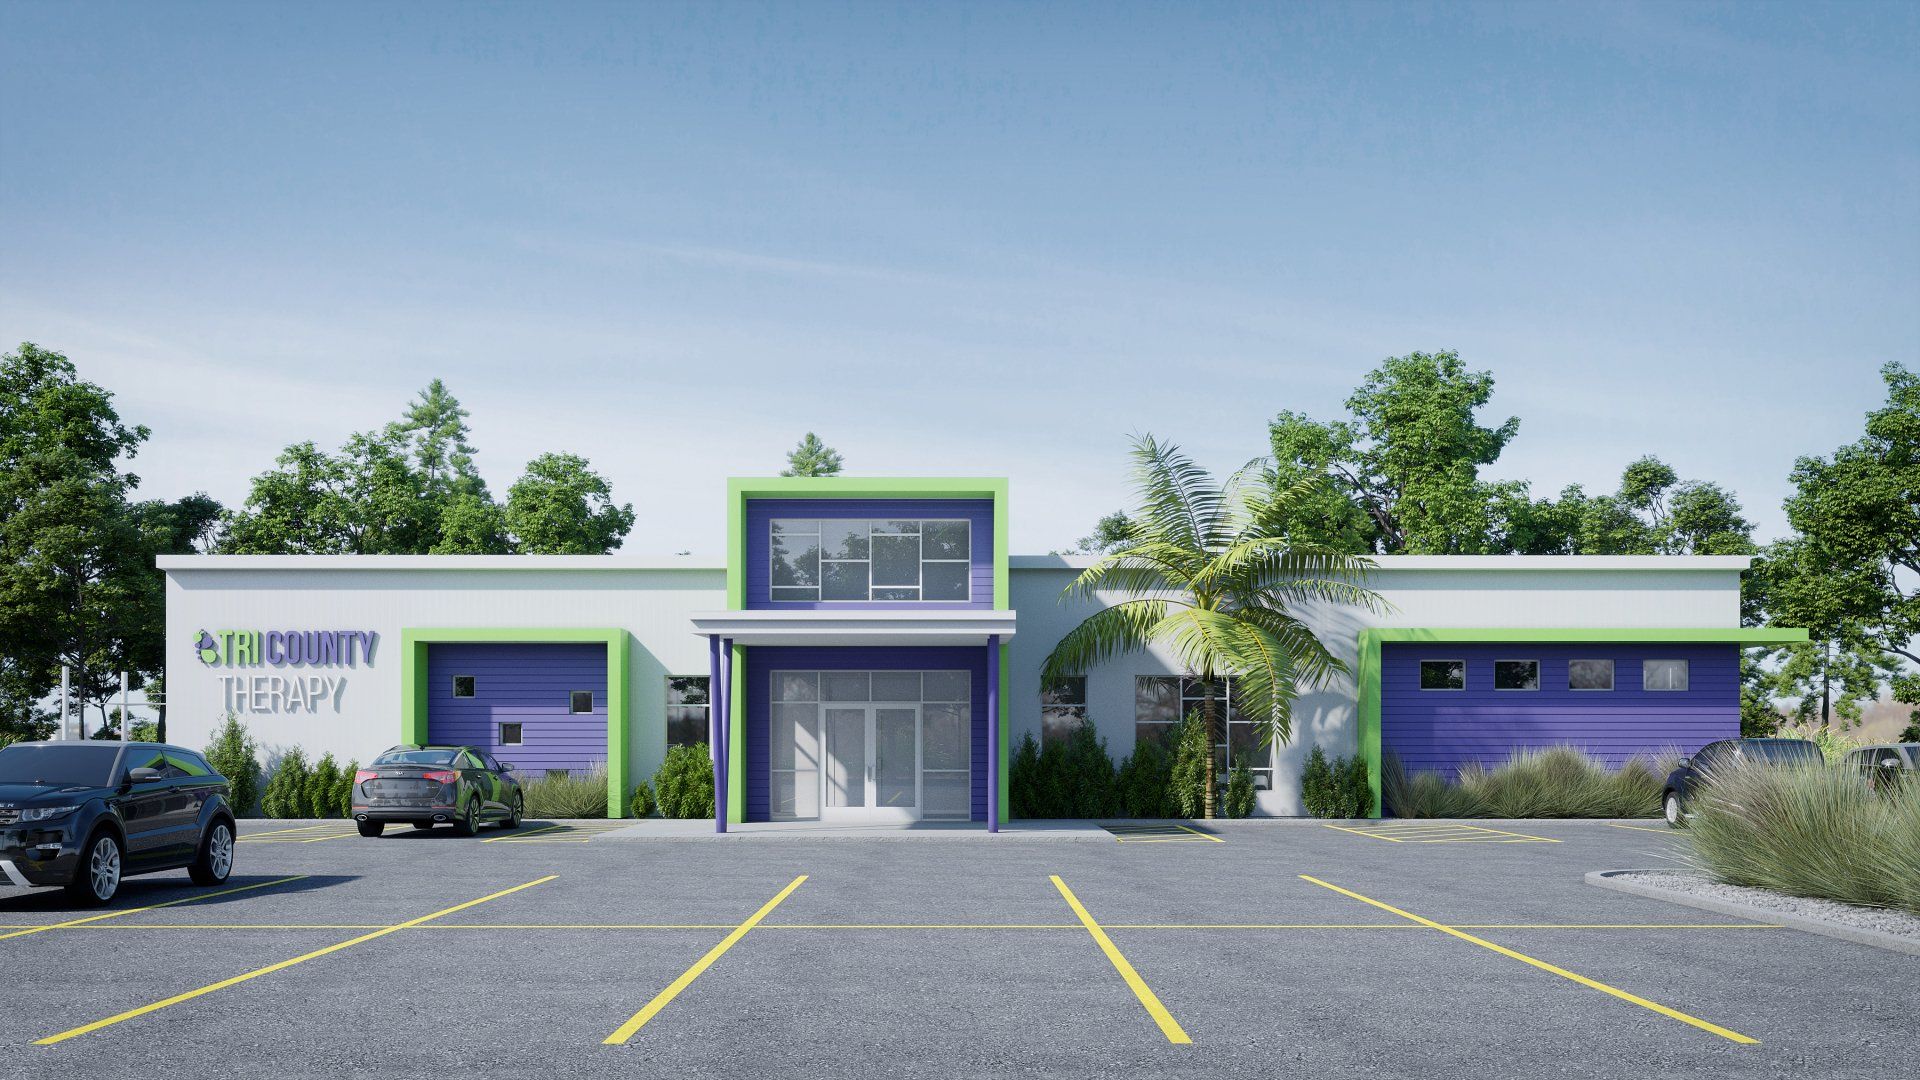 an artist 's impression of a building with a parking lot in front of it .